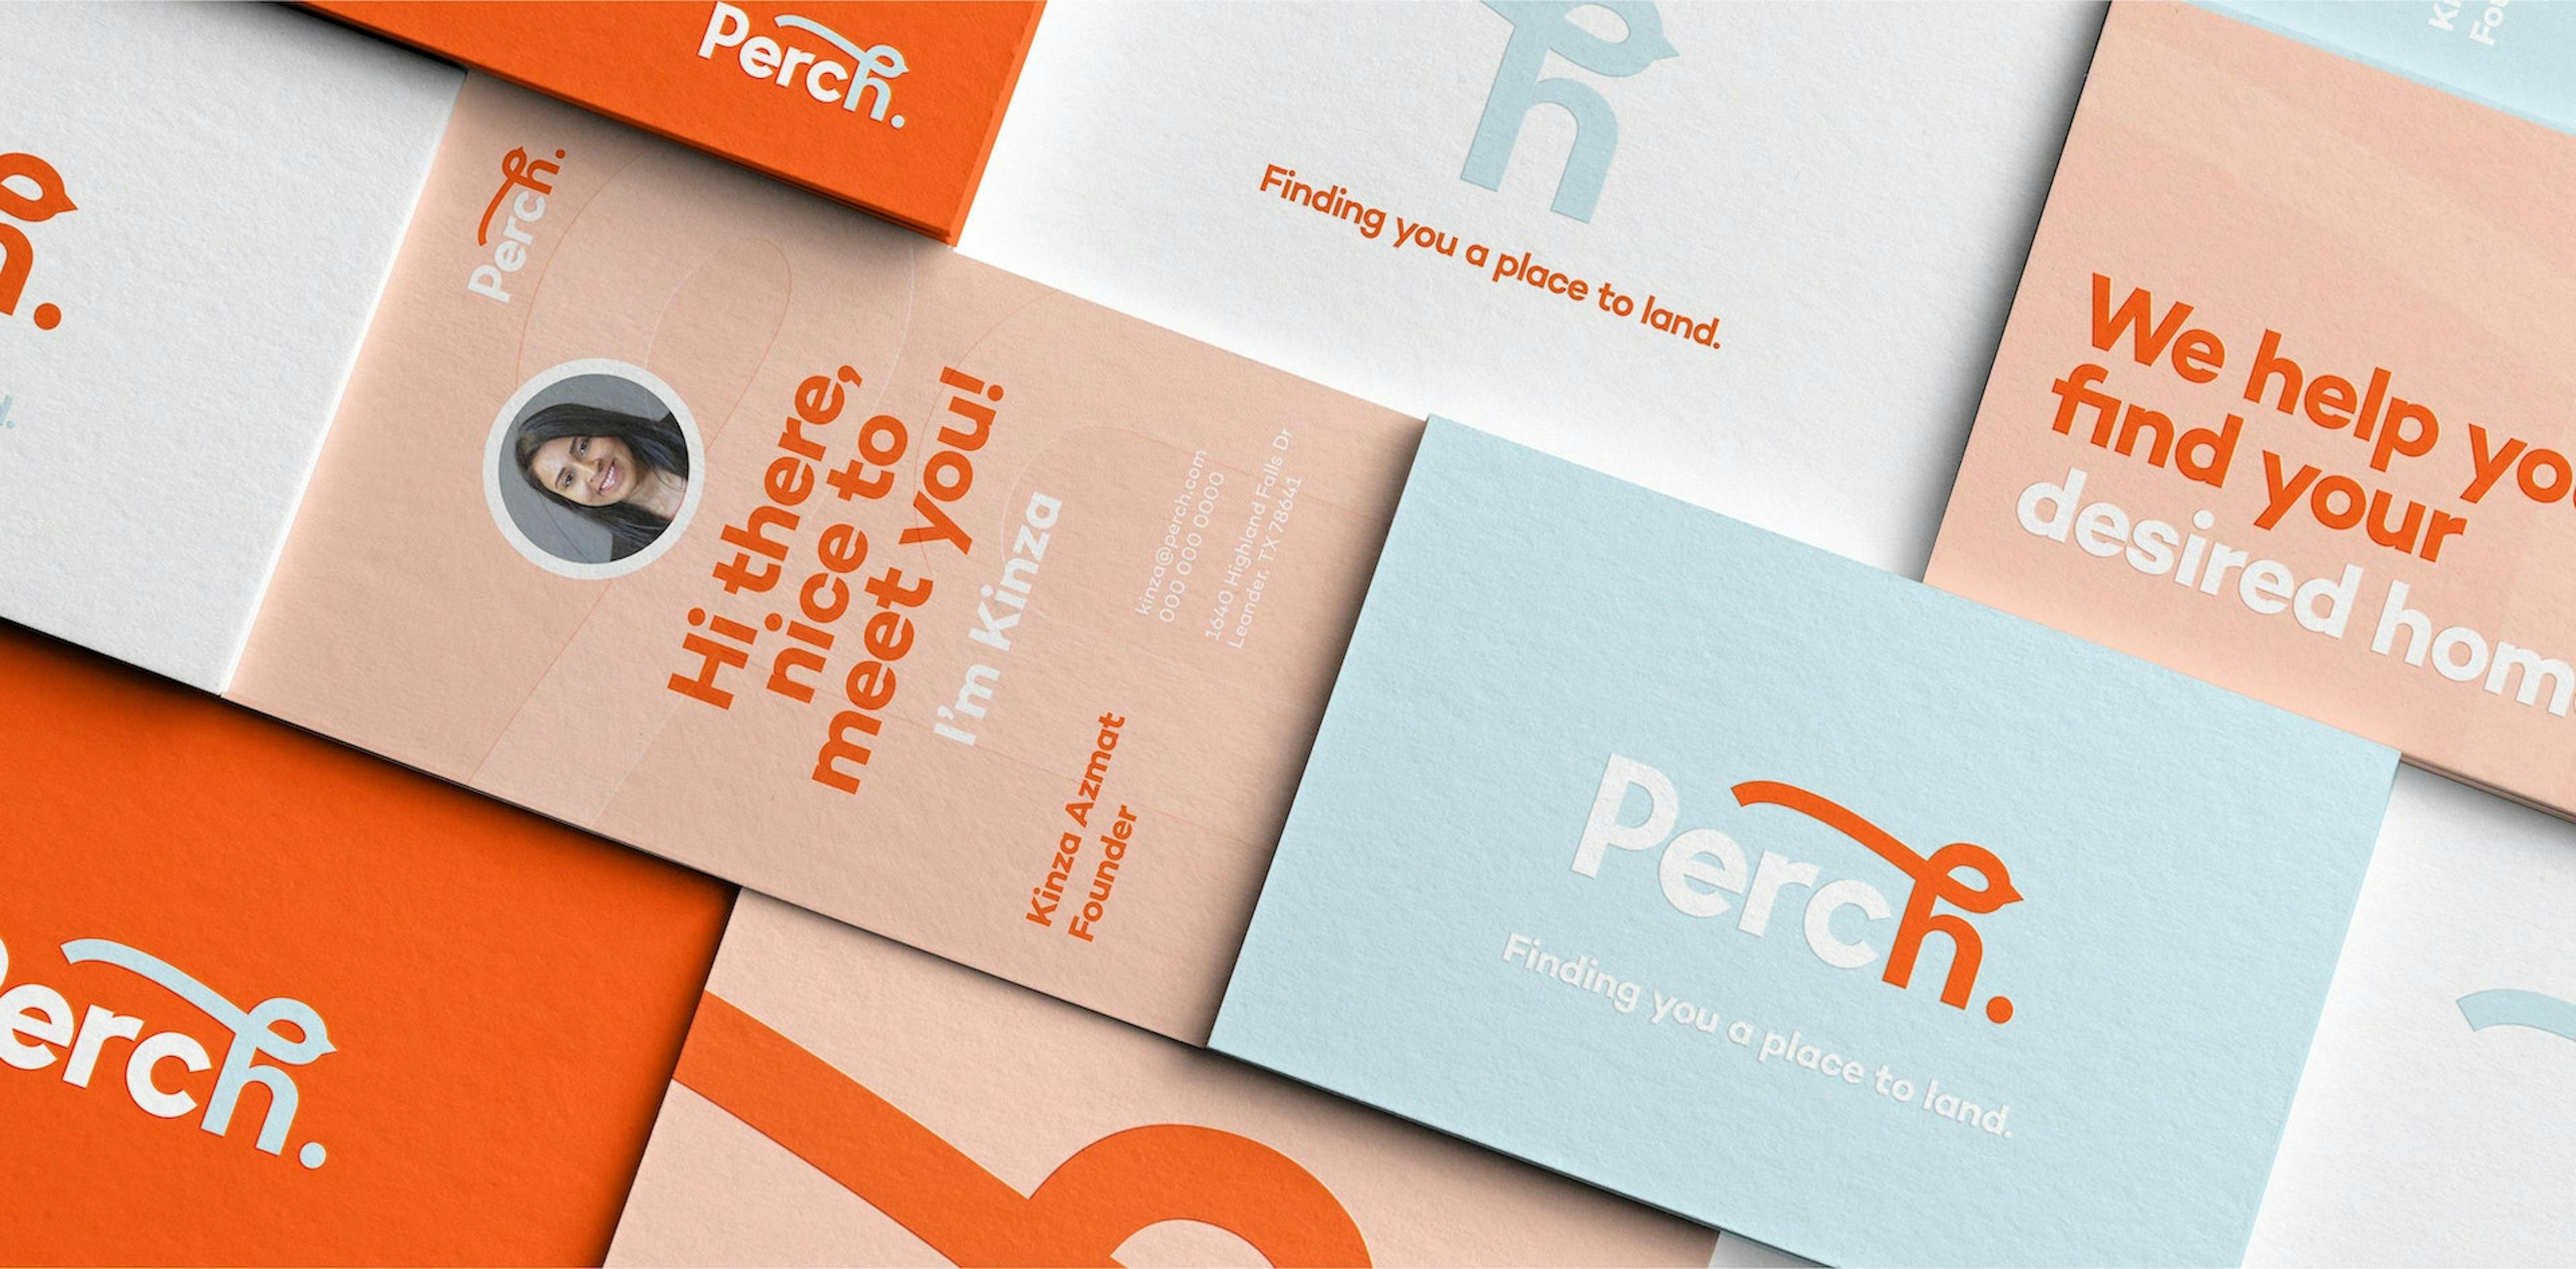 A collection of Perch brand collateral, including business cards and promotional materials, featuring the company logo and contact information.